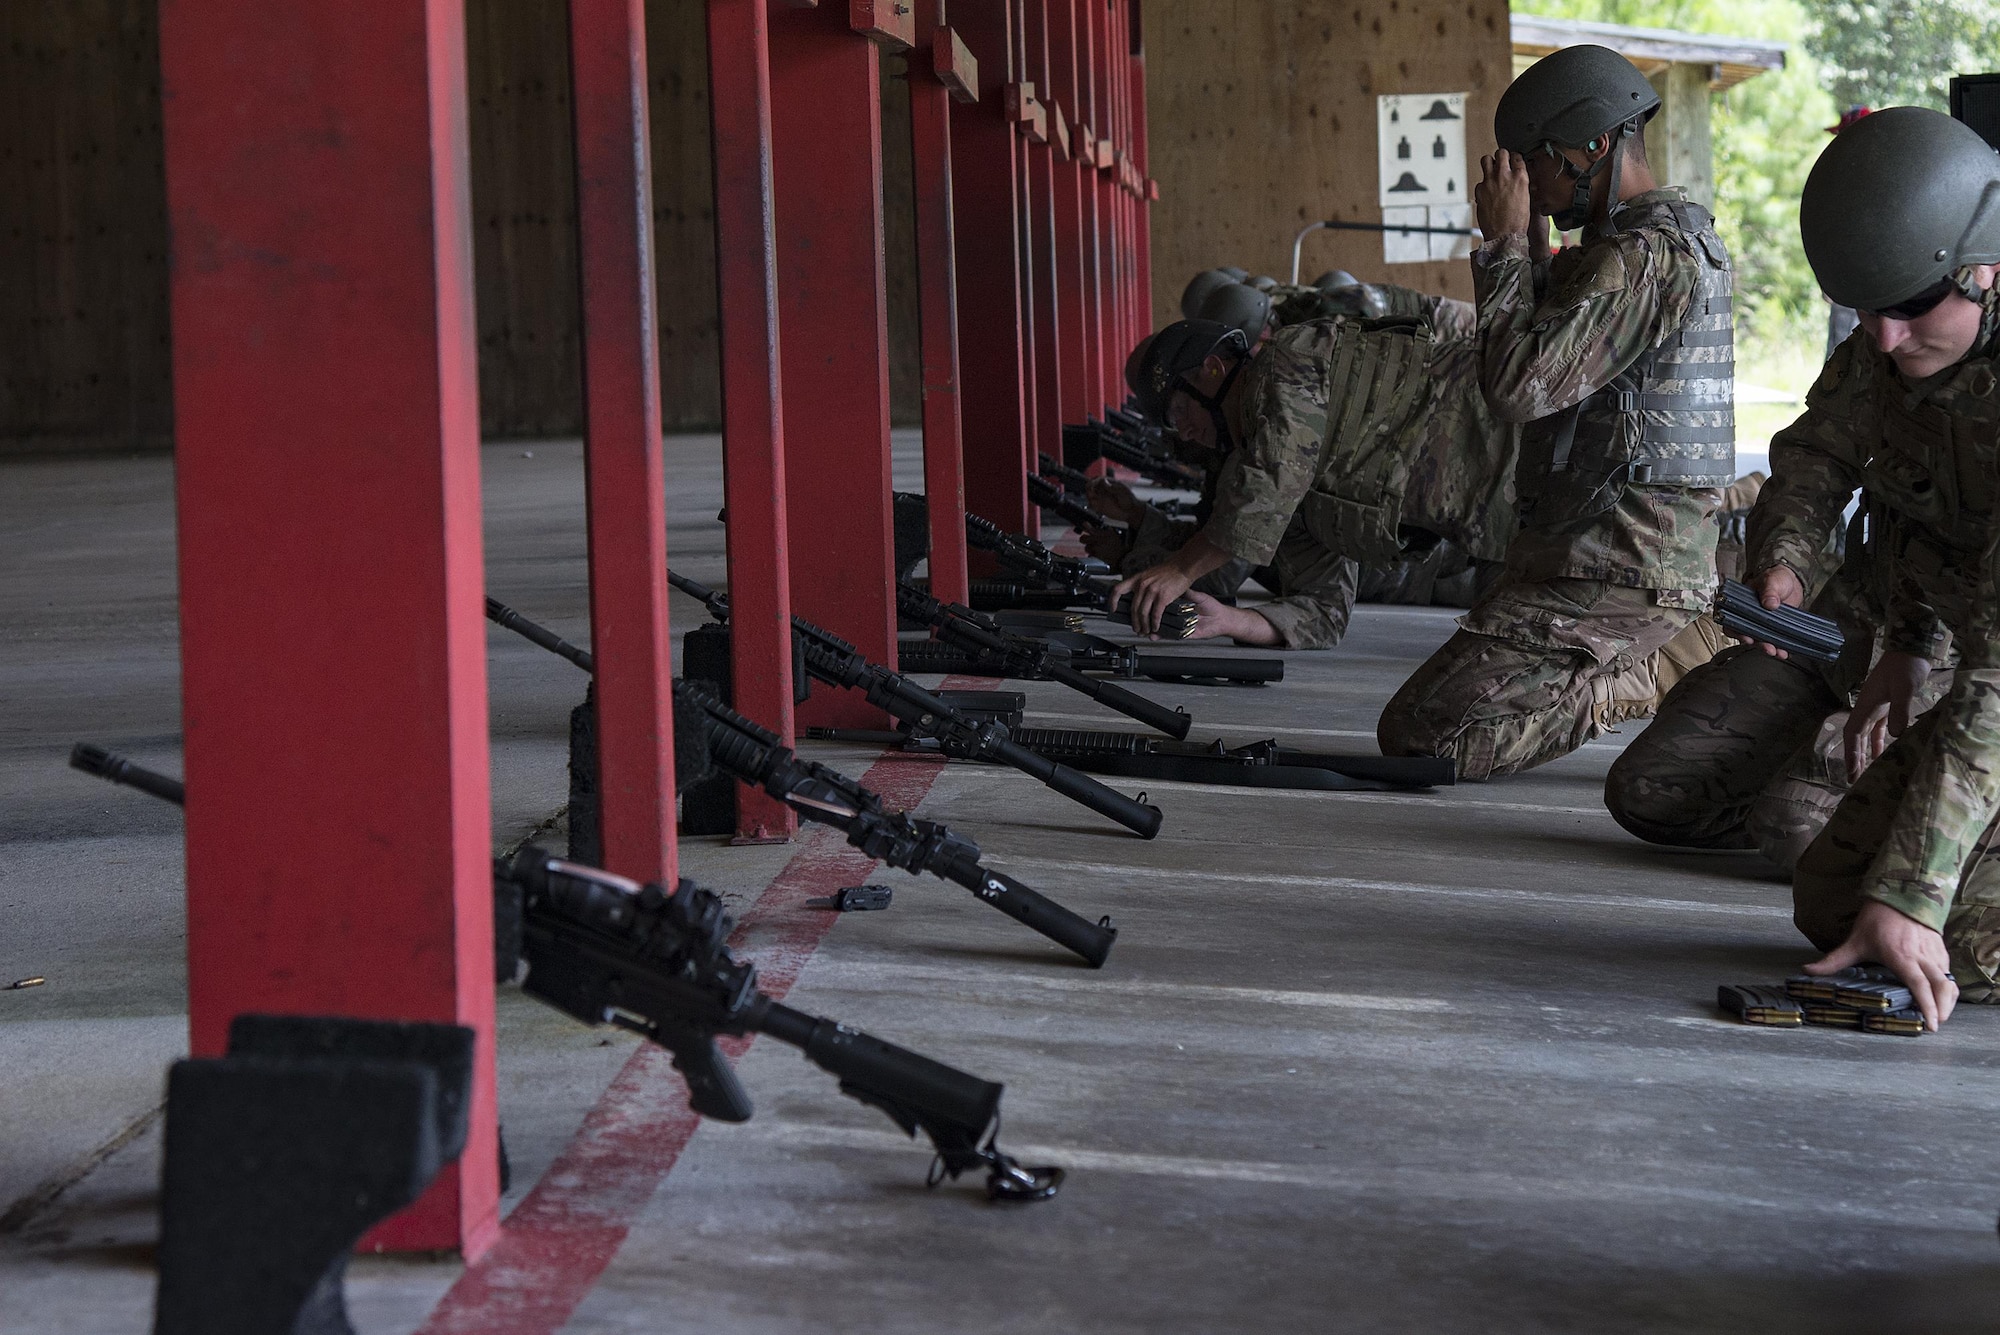 Airmen prepare to shoot at the Combat Arms Training and Maintenance range, July 25, 2017, at Moody Air Force Base, Ga. During CATM, Airmen must demonstrate quality safety standards while handling and shooting their weapons in order to qualify to deploy. (U.S. Air Force photo by Airman 1st Class Erick Requadt)